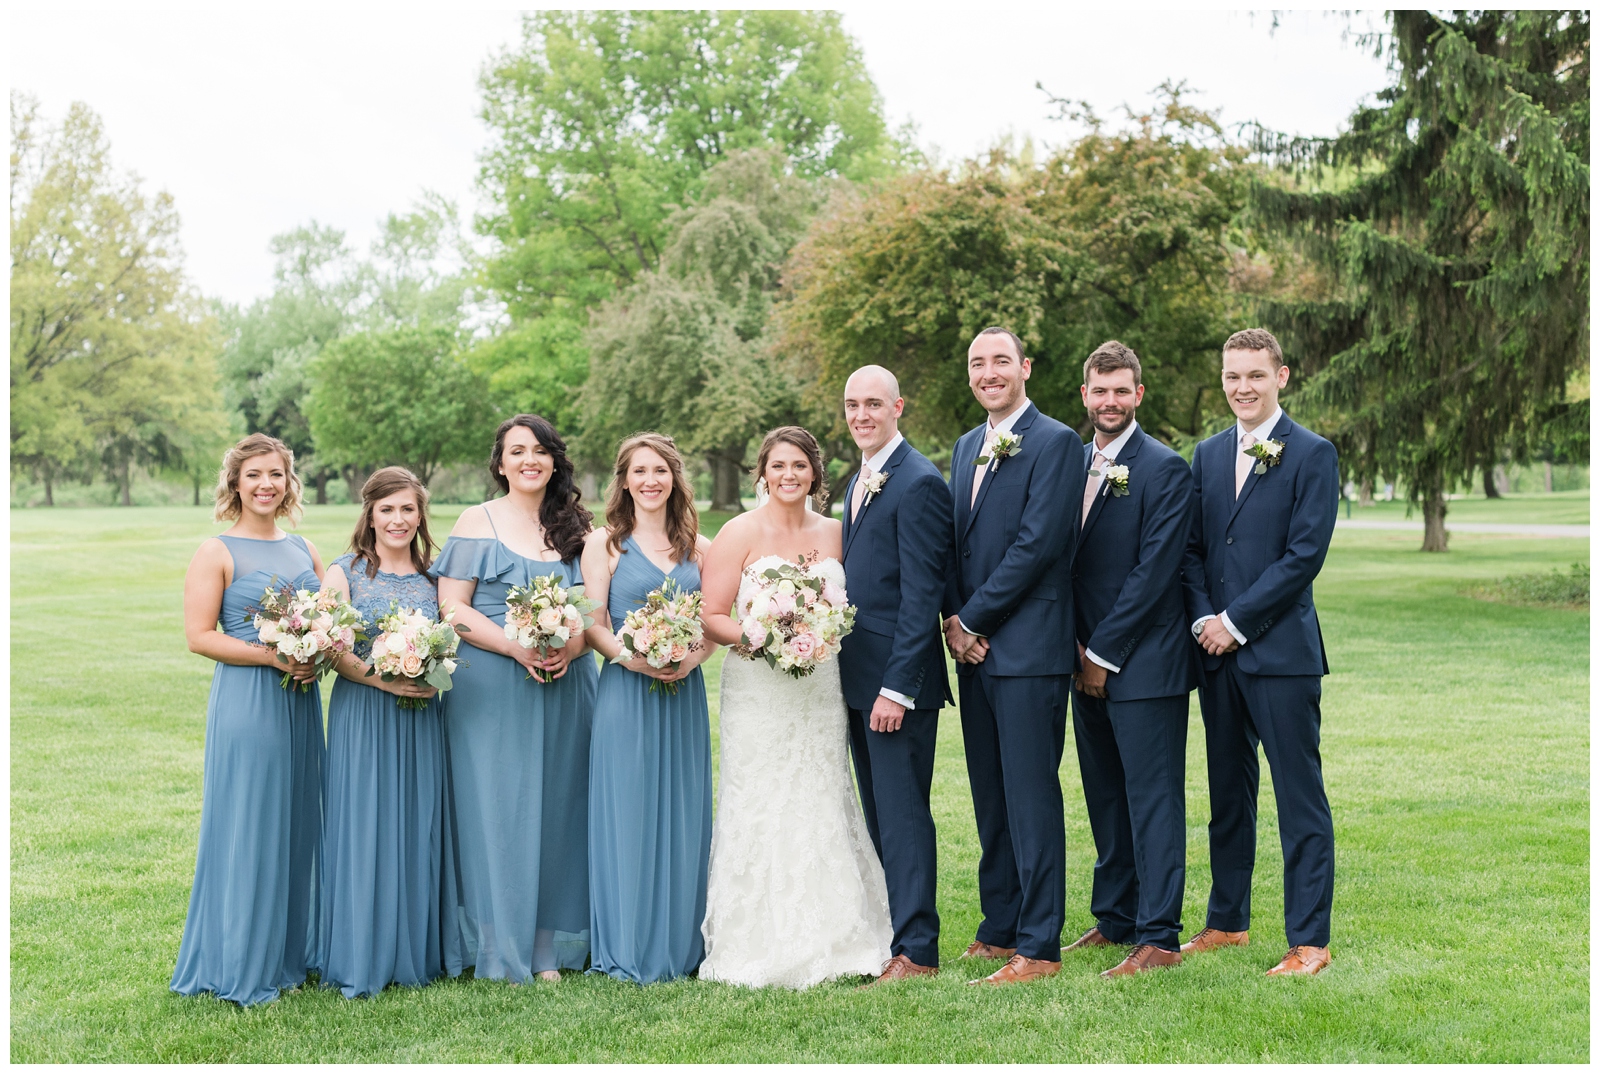 bridesmaids in blue gowns stand next to bride while groomsmen in navy suits stand by groom during wedding portraits in Ohio